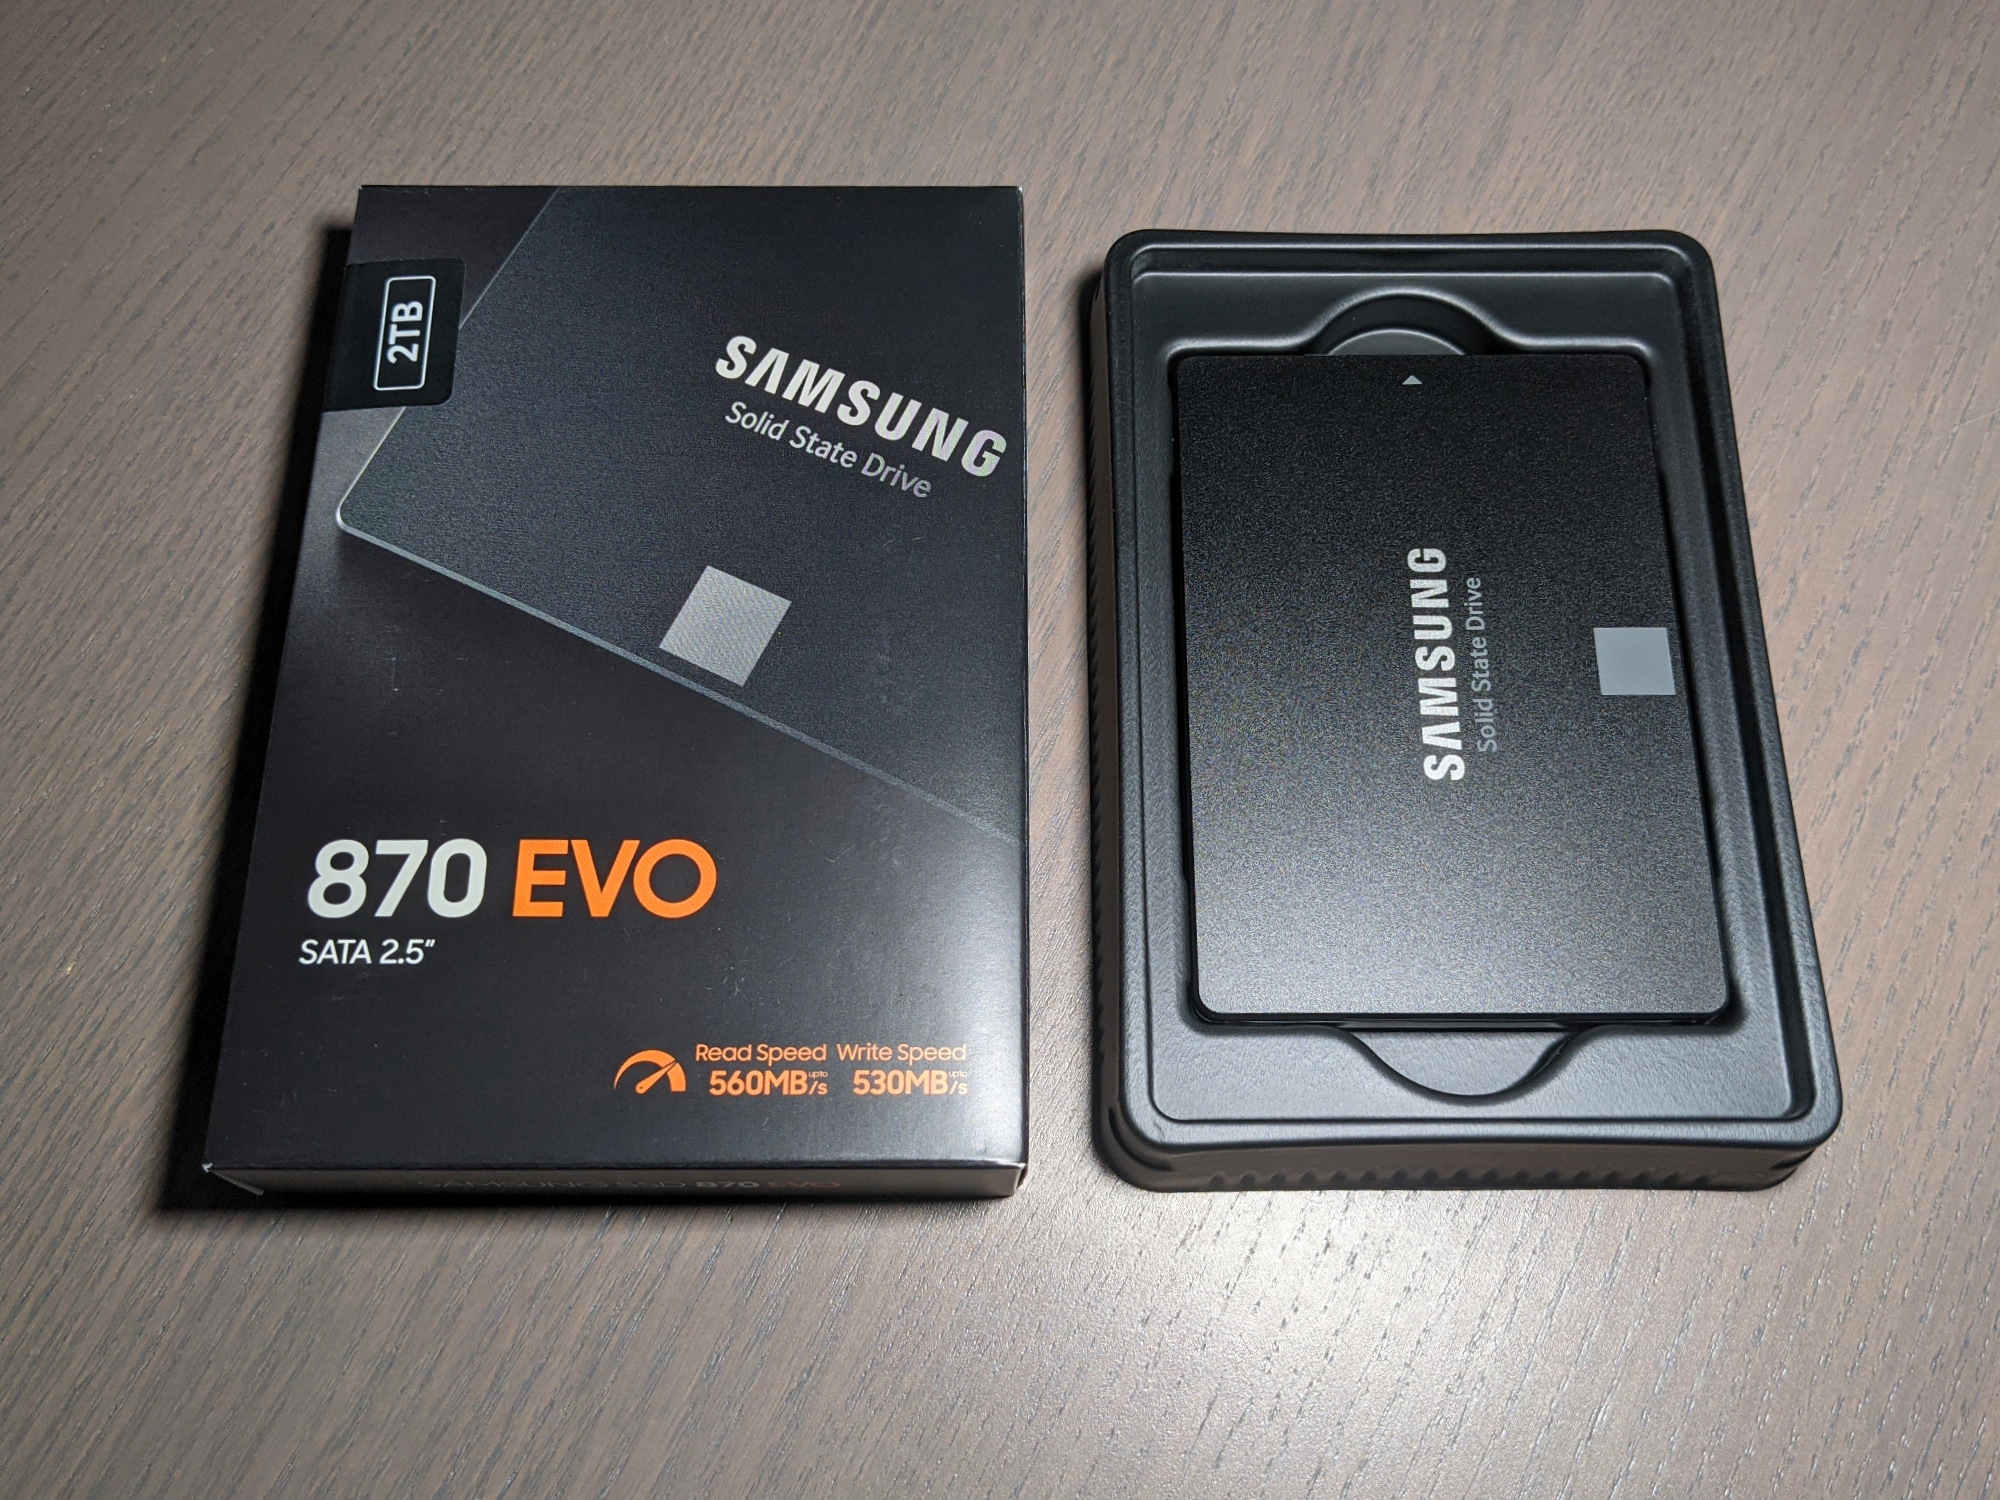 Photos from our Samsung 870 EVO SSD review. Overall, we'd